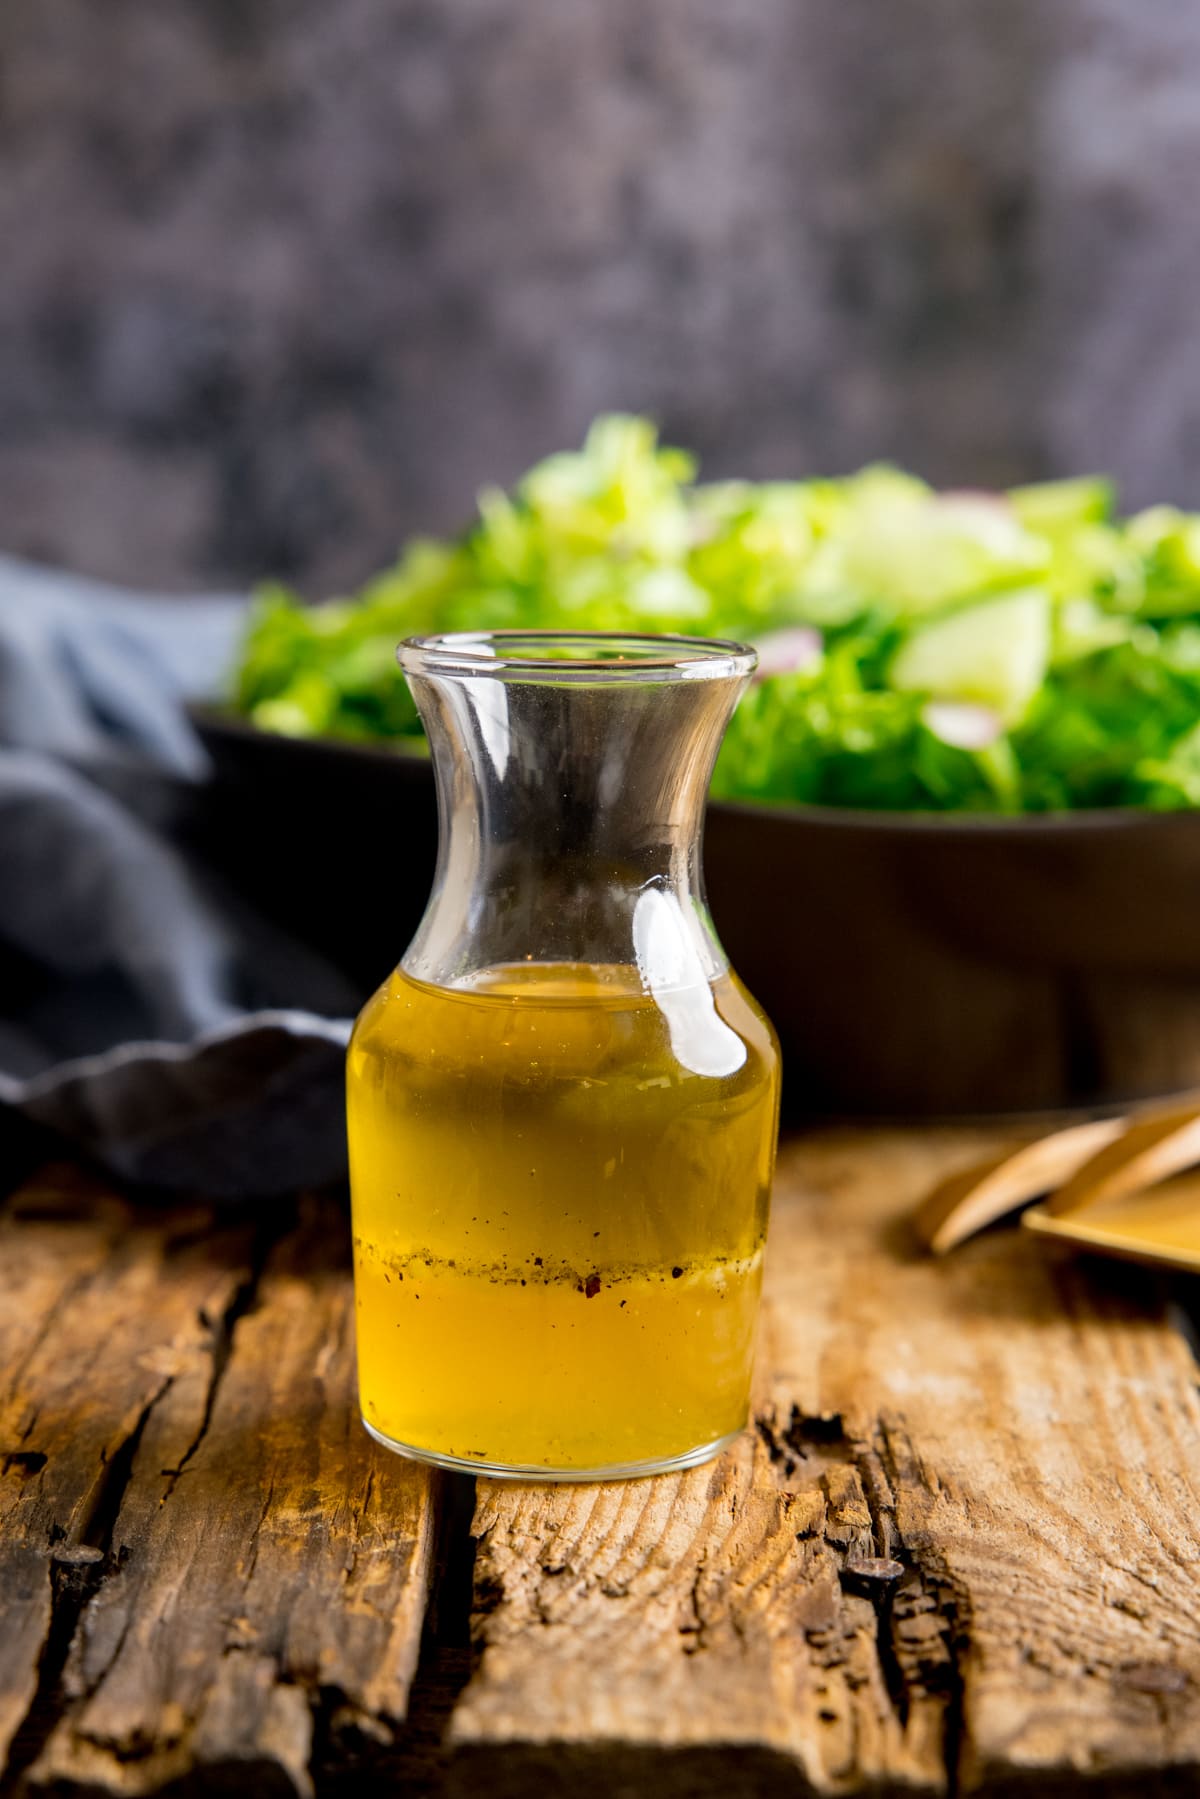 Small glass jar filled with vinaigrette dressing on a wooden table. In the background is a bowl of salad and a blue napkin.